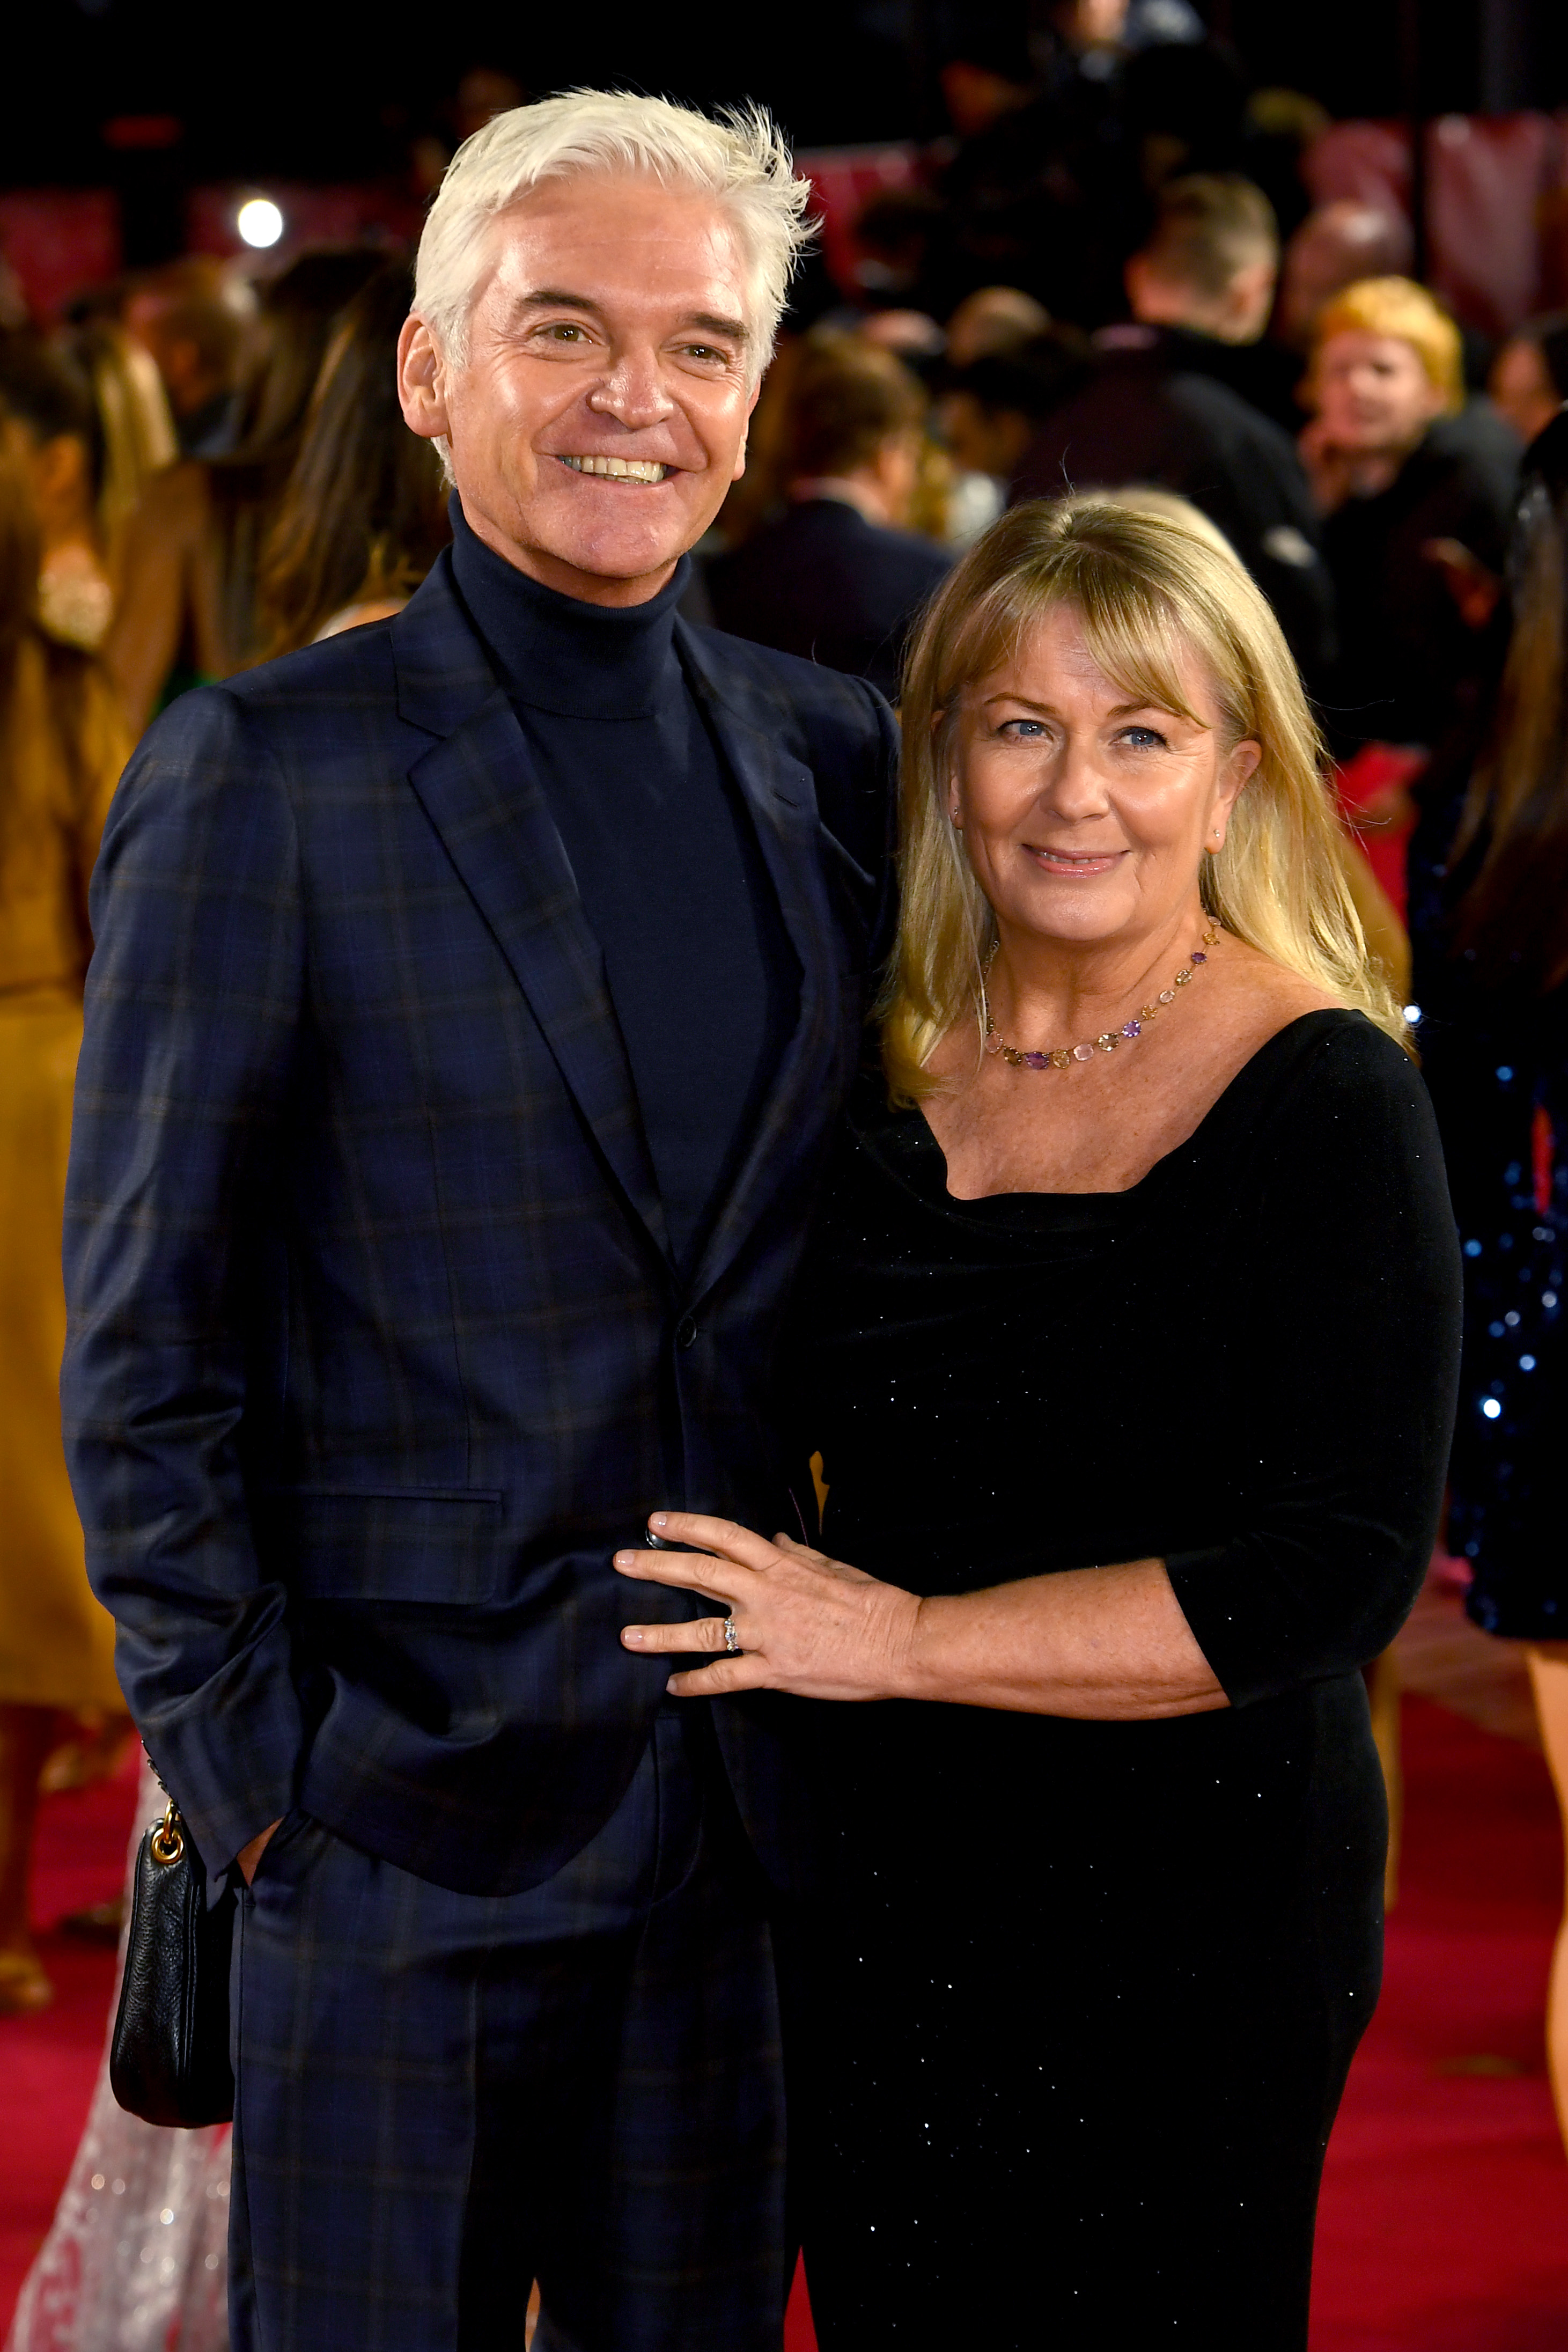 Phillip Schofield and Stephanie Lowe attend the ITV Palooza 2019 on November 12, 2019, in London, England. | Source: Getty Images